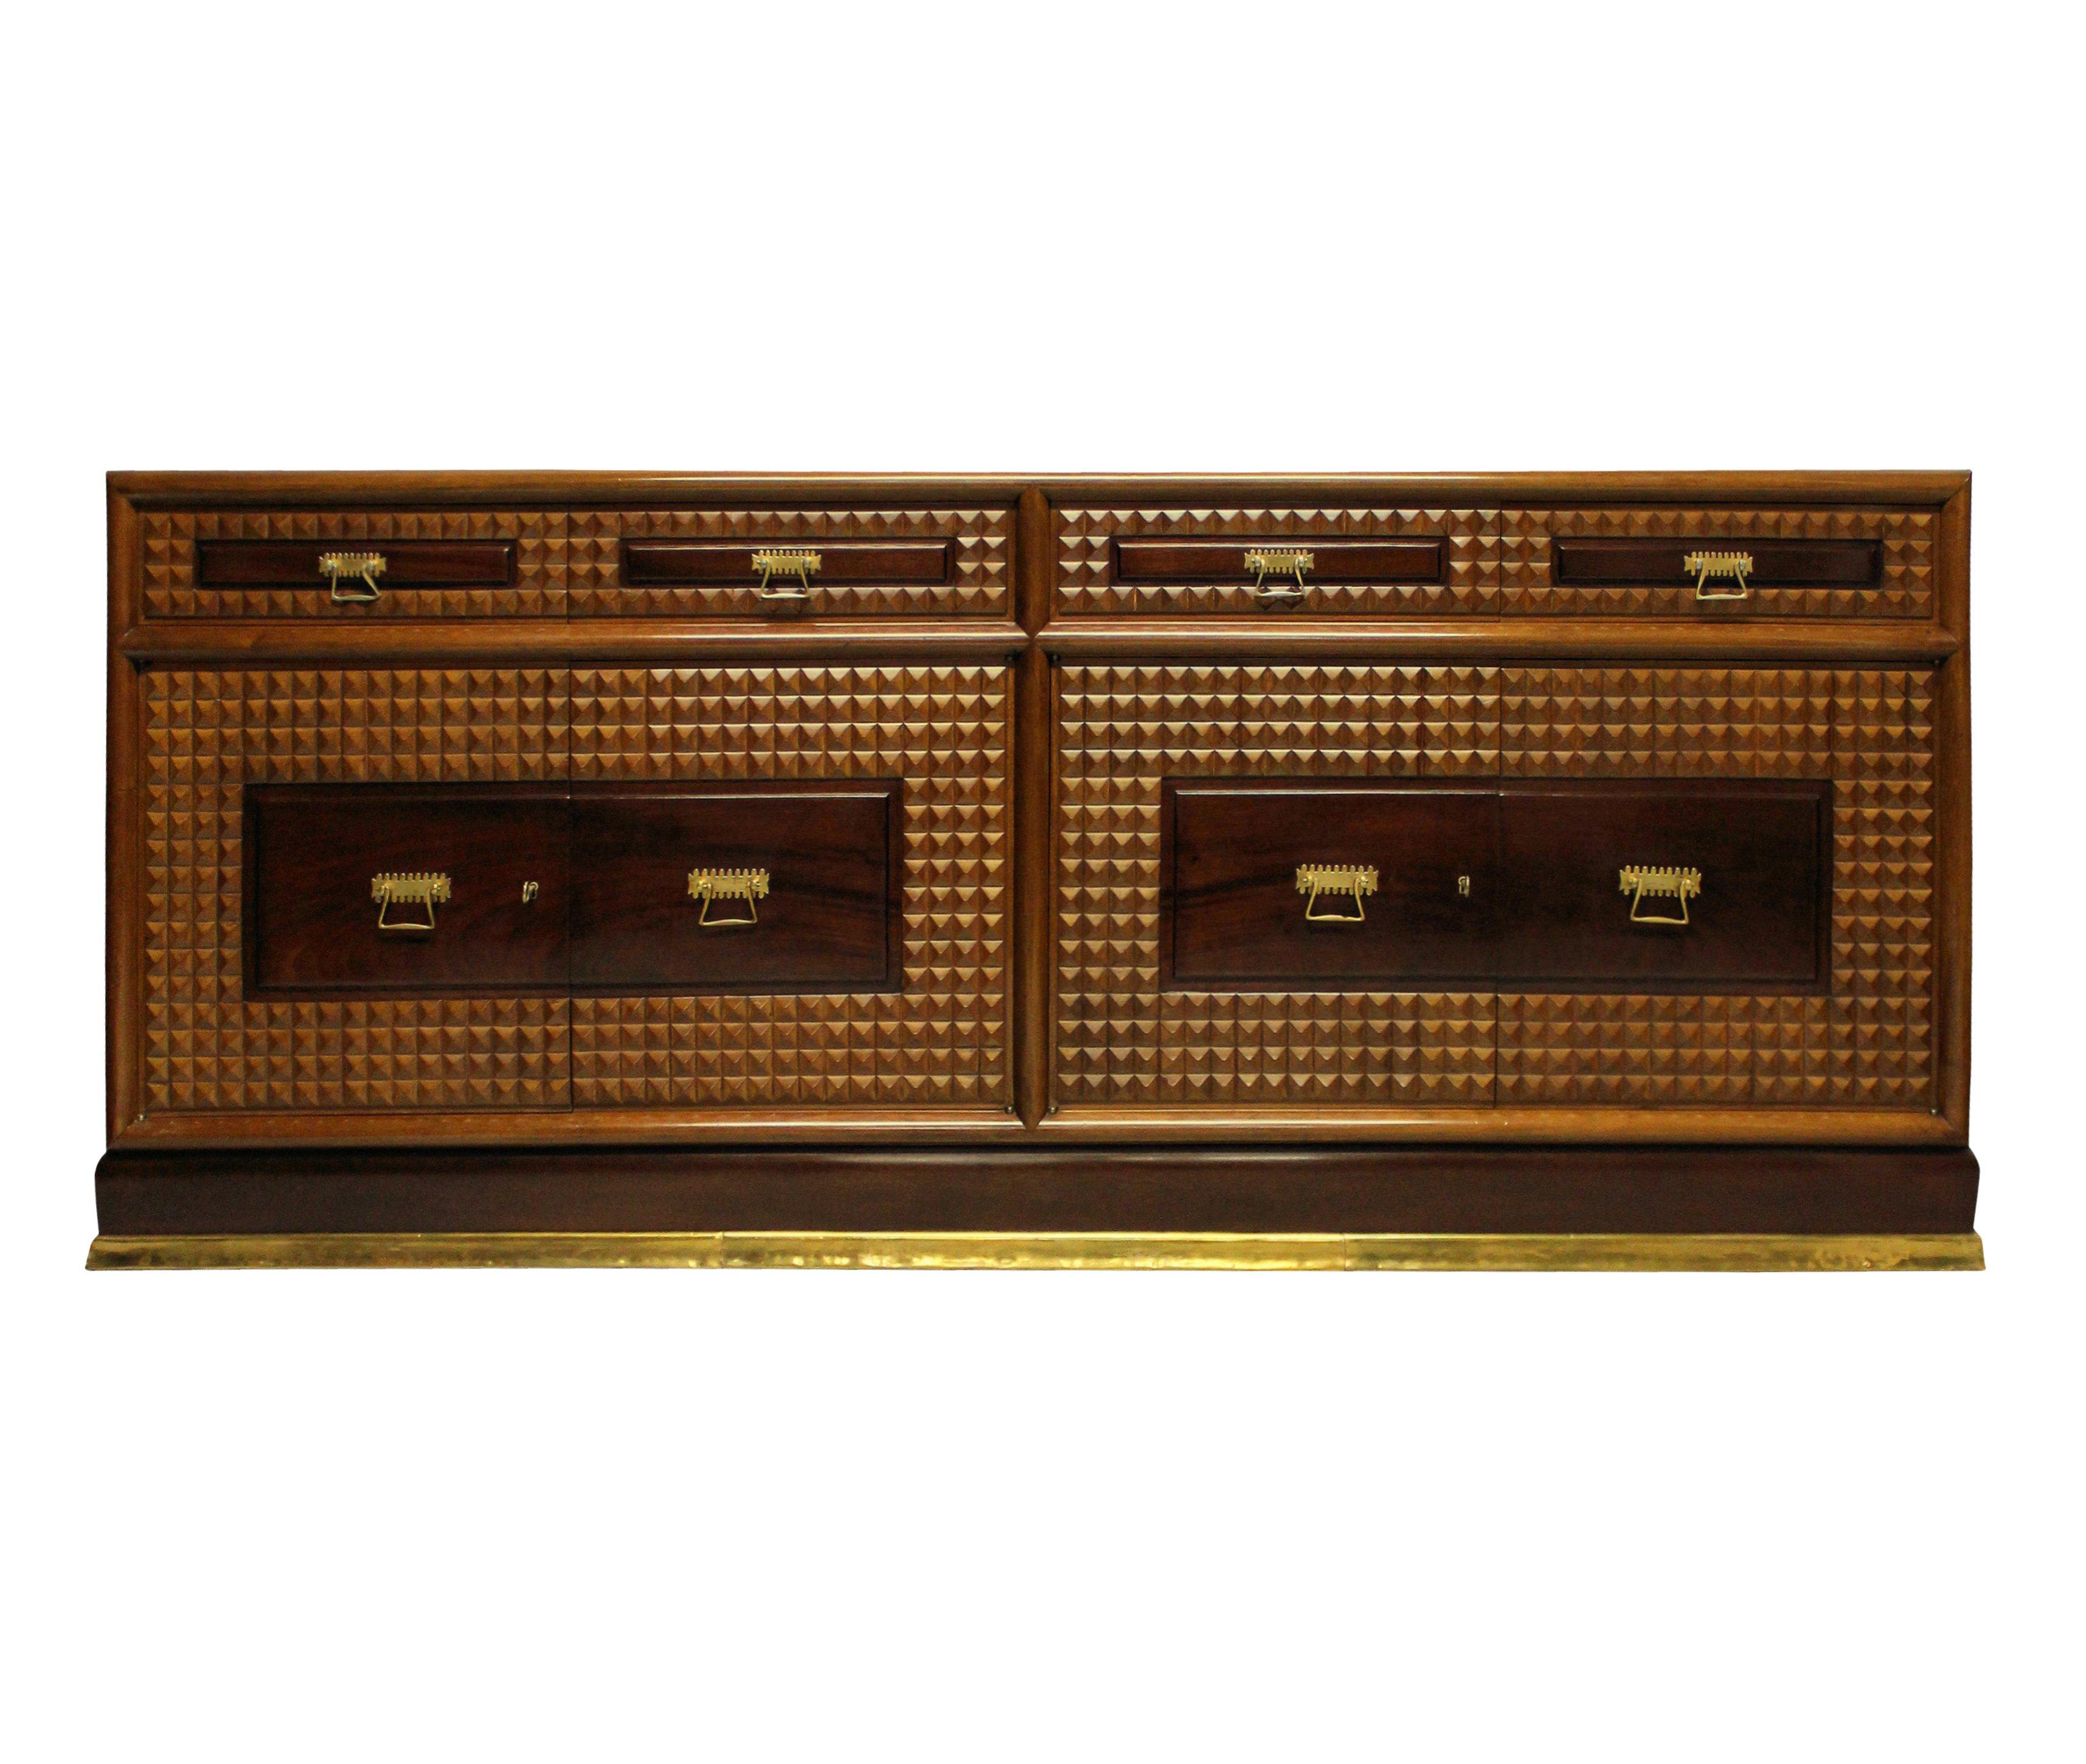 A pair of monumental Italian credenzas of superb quality by Atelier Borsani. Each with central cupboards lined in blond wood and four drawers. The exterior is comprised of various walnut veneers, with a finely carved geometric diamond pattern